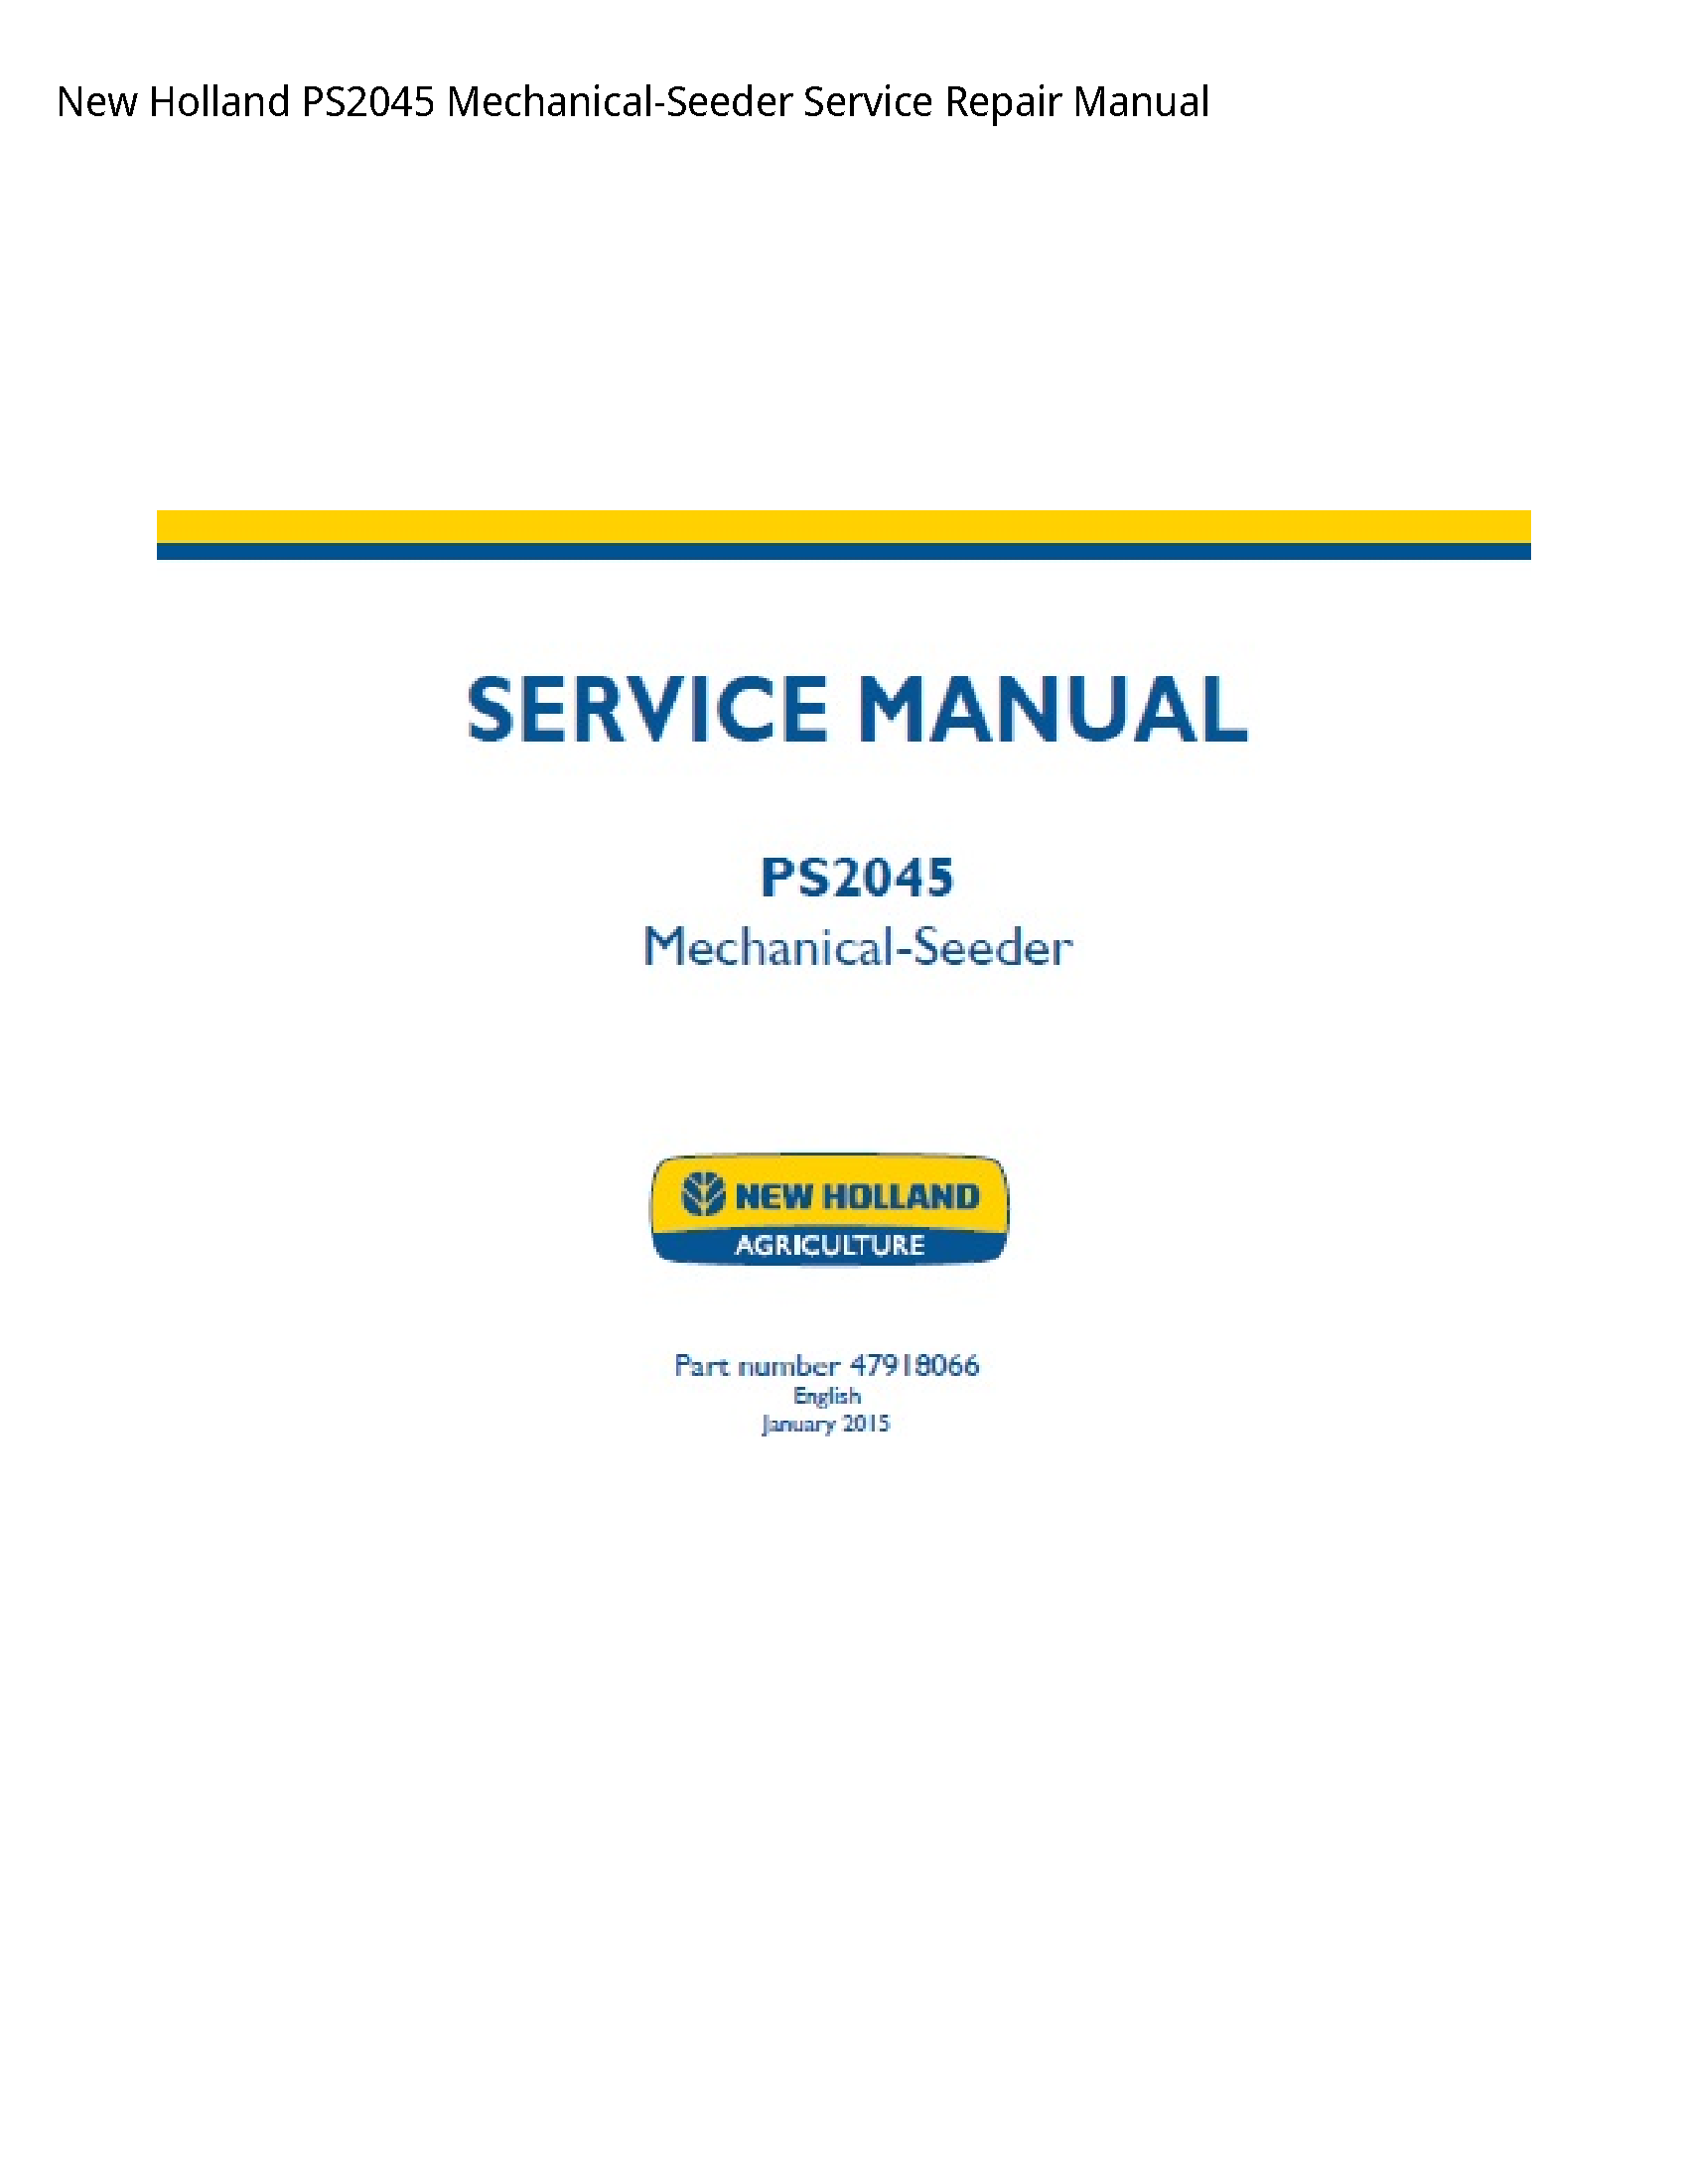 New Holland PS2045 Mechanical-Seeder manual